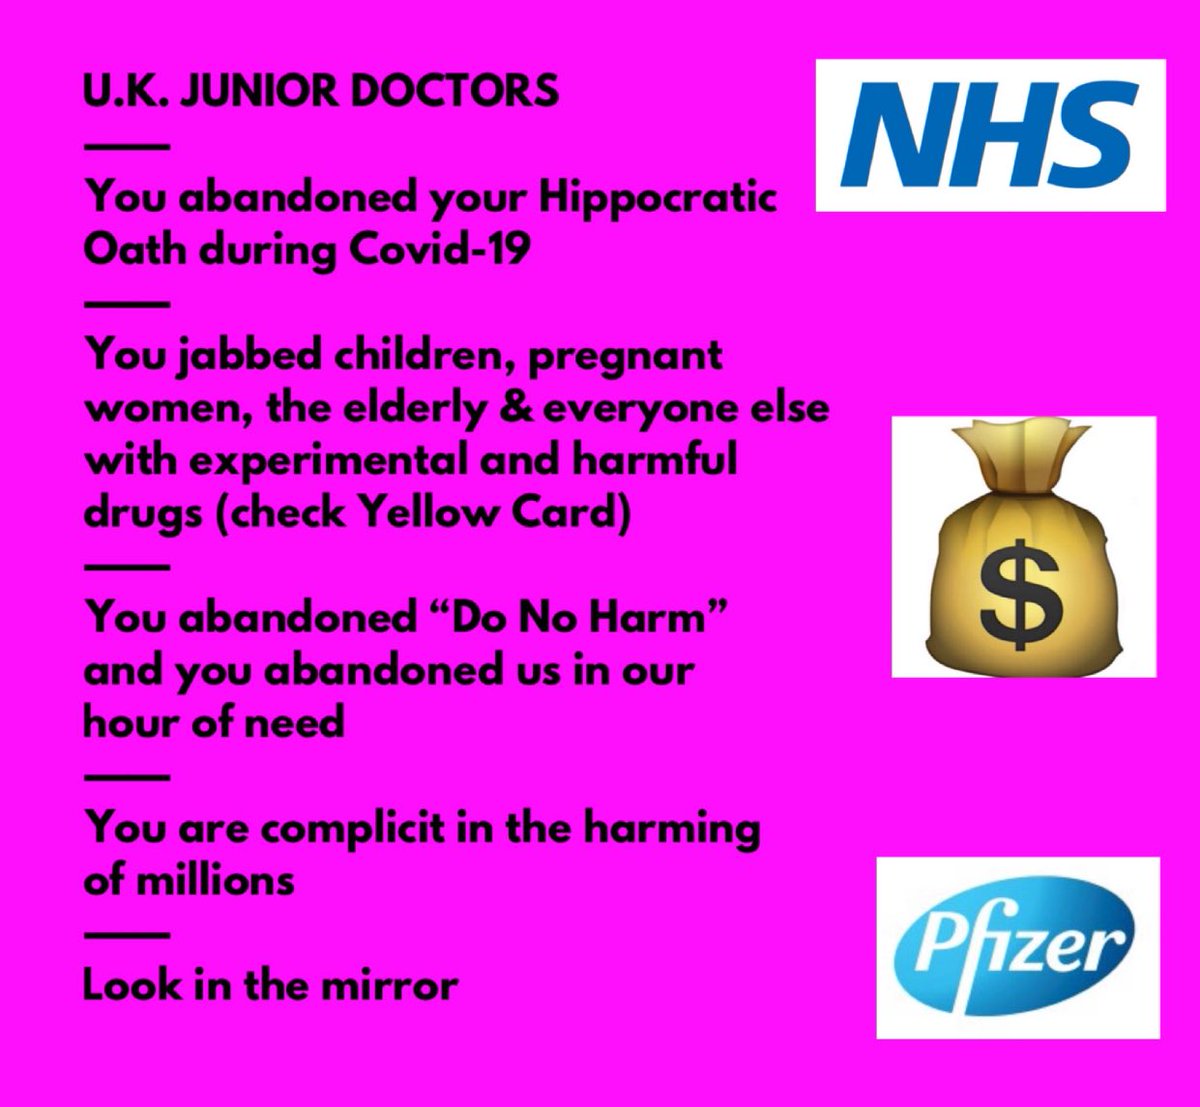 @BBCNews To ALL Junior Doctors @BMA_JuniorDocs @TheBMA @BMA_GP you are COMPLICIT in the harming of millions of people: men, women & children

⚠️ Midazolam
⚠️ NG163
⚠️ DNRs
⚠️ Harmful 💉💉💉

Do no harm became DO HARM TO EVERYONE; you abandoned your Hippocratic Oath & your patients